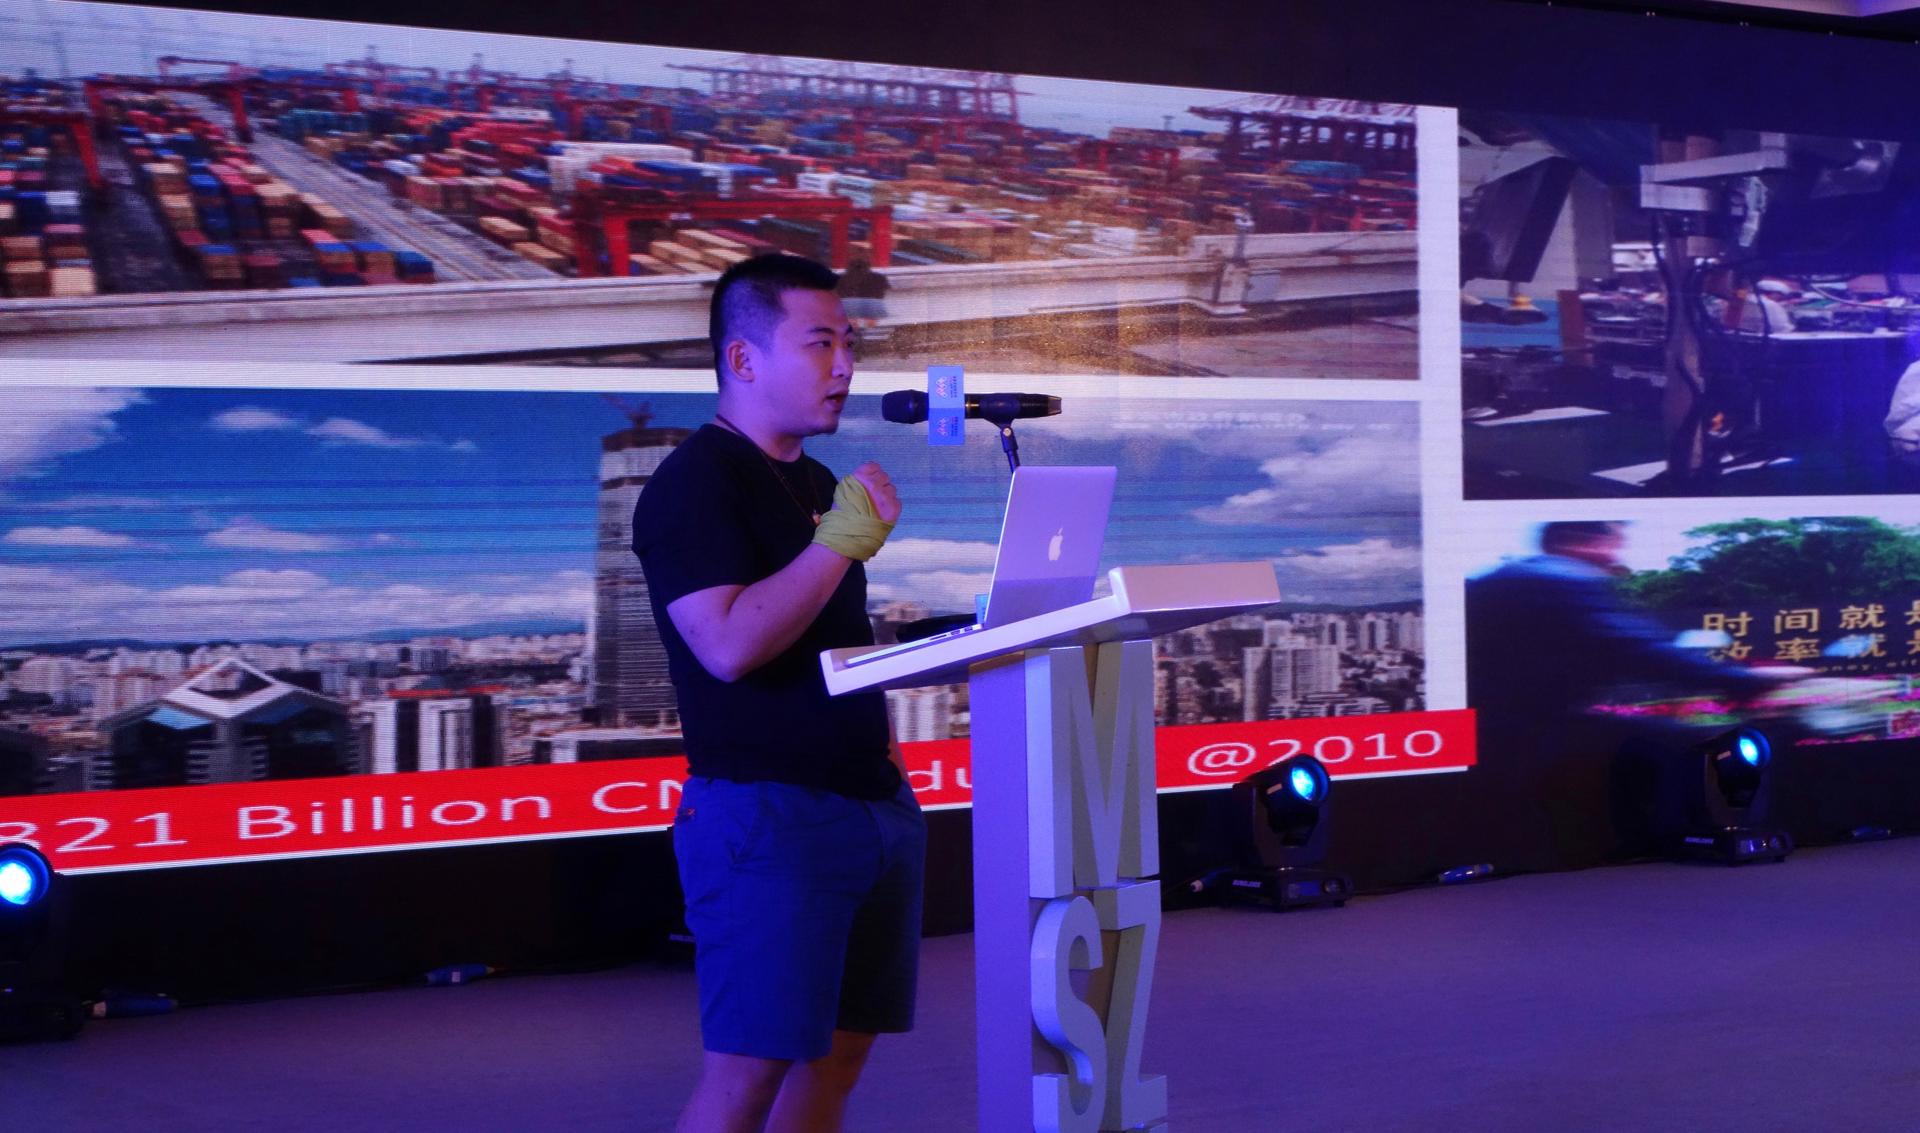 Eric Pan, founder of SEEED Studio in Shenzhen, China